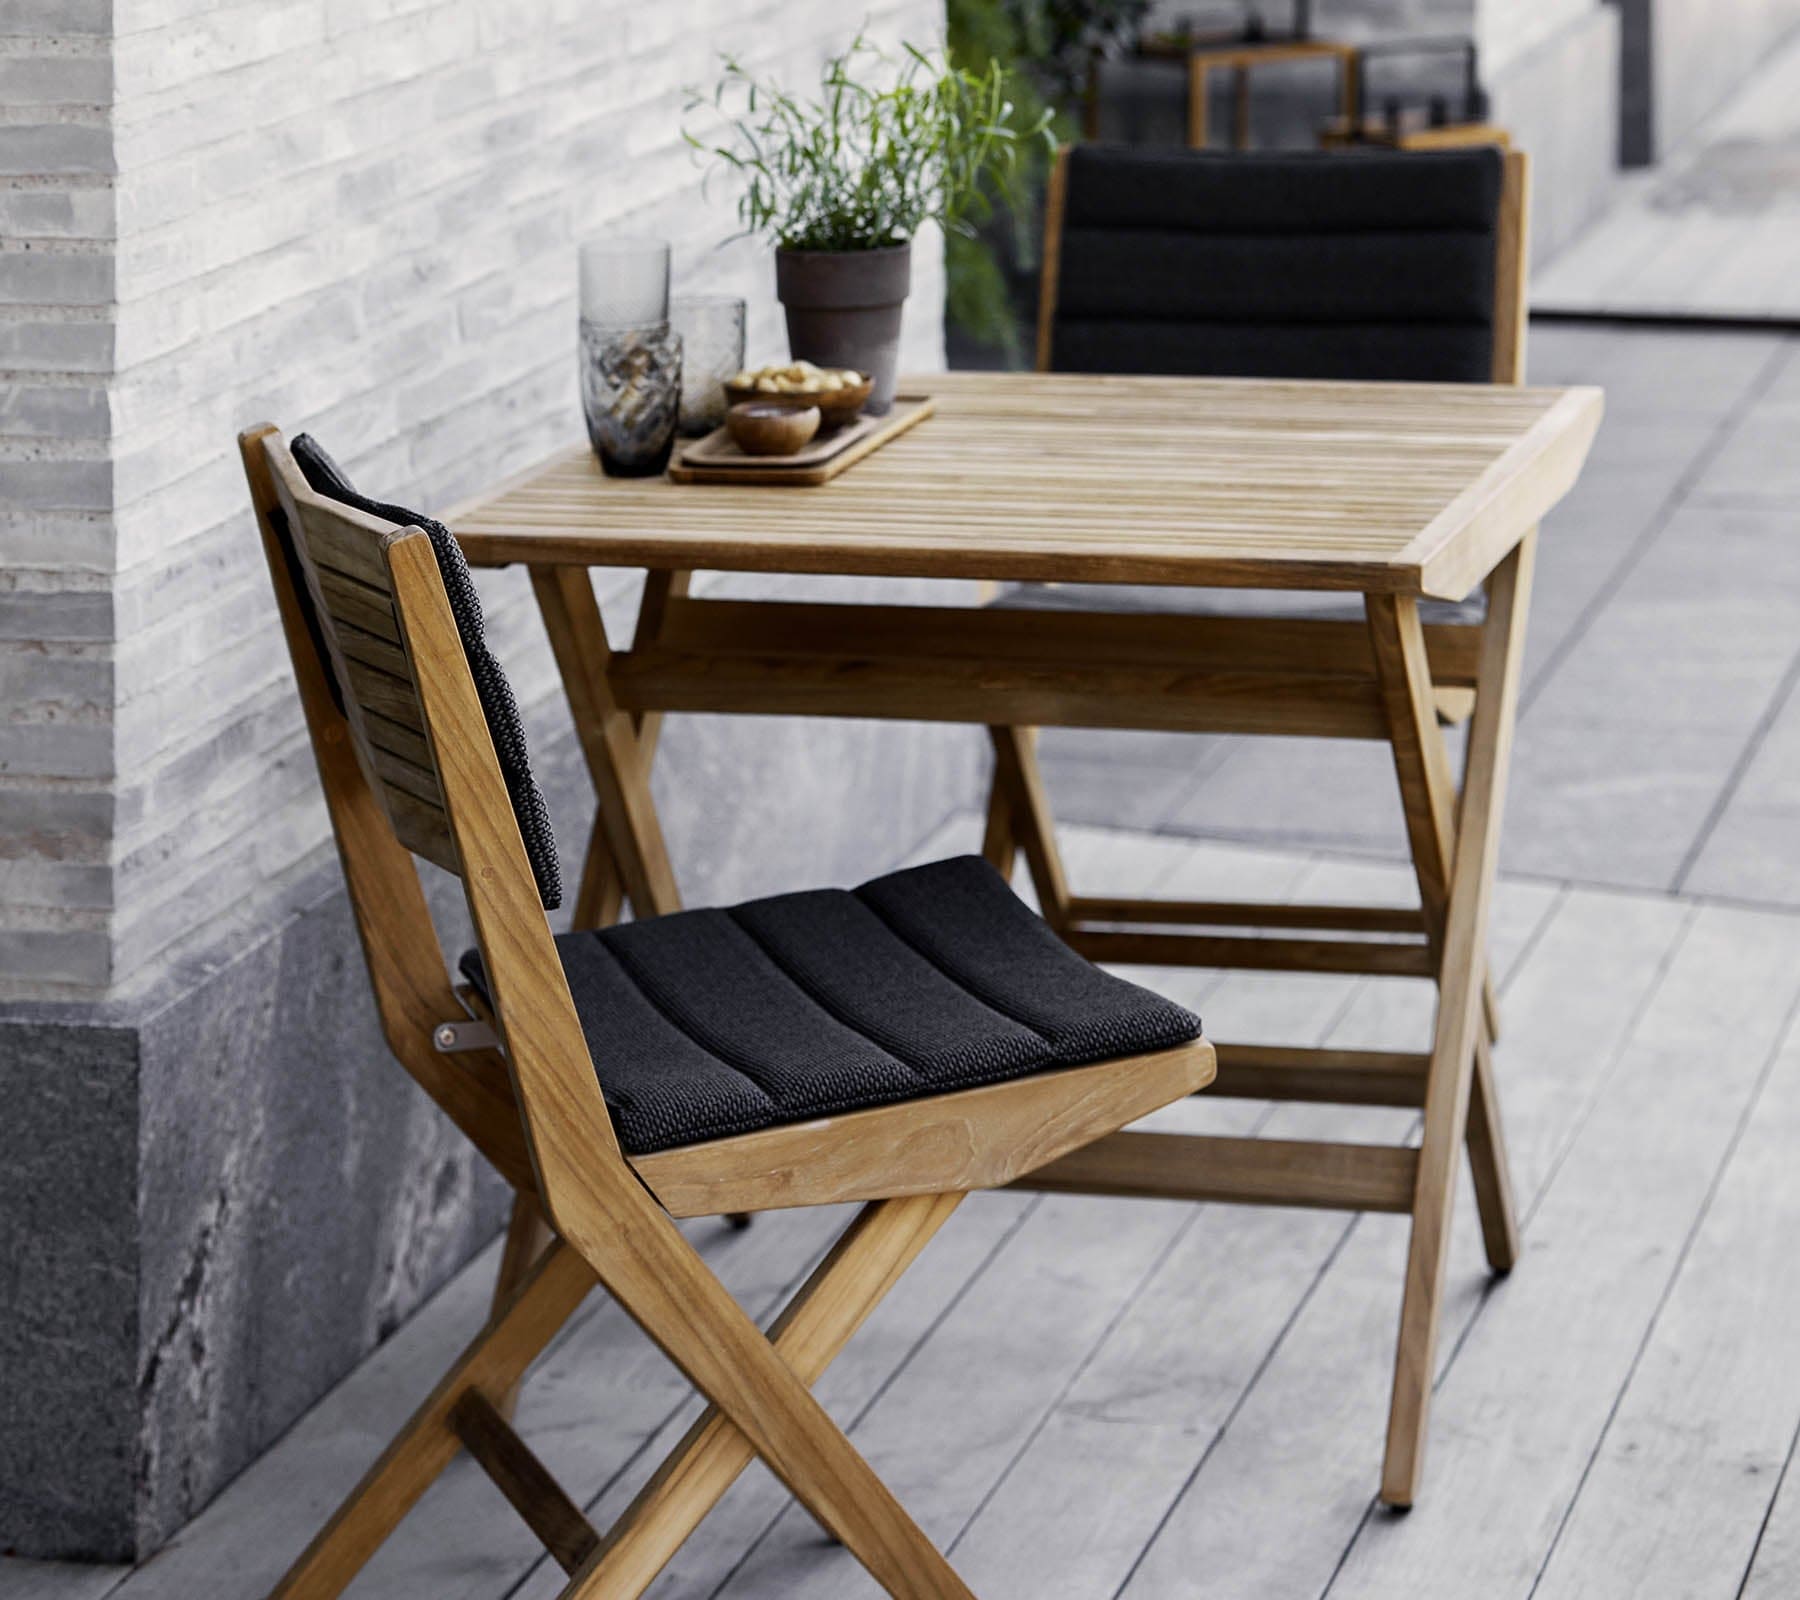 Boxhill's Flip Folding Outdoor Teak Dining Table Small lifestyle with Flip Folding Outdoor Teak Dining Chair beside the wall at patio